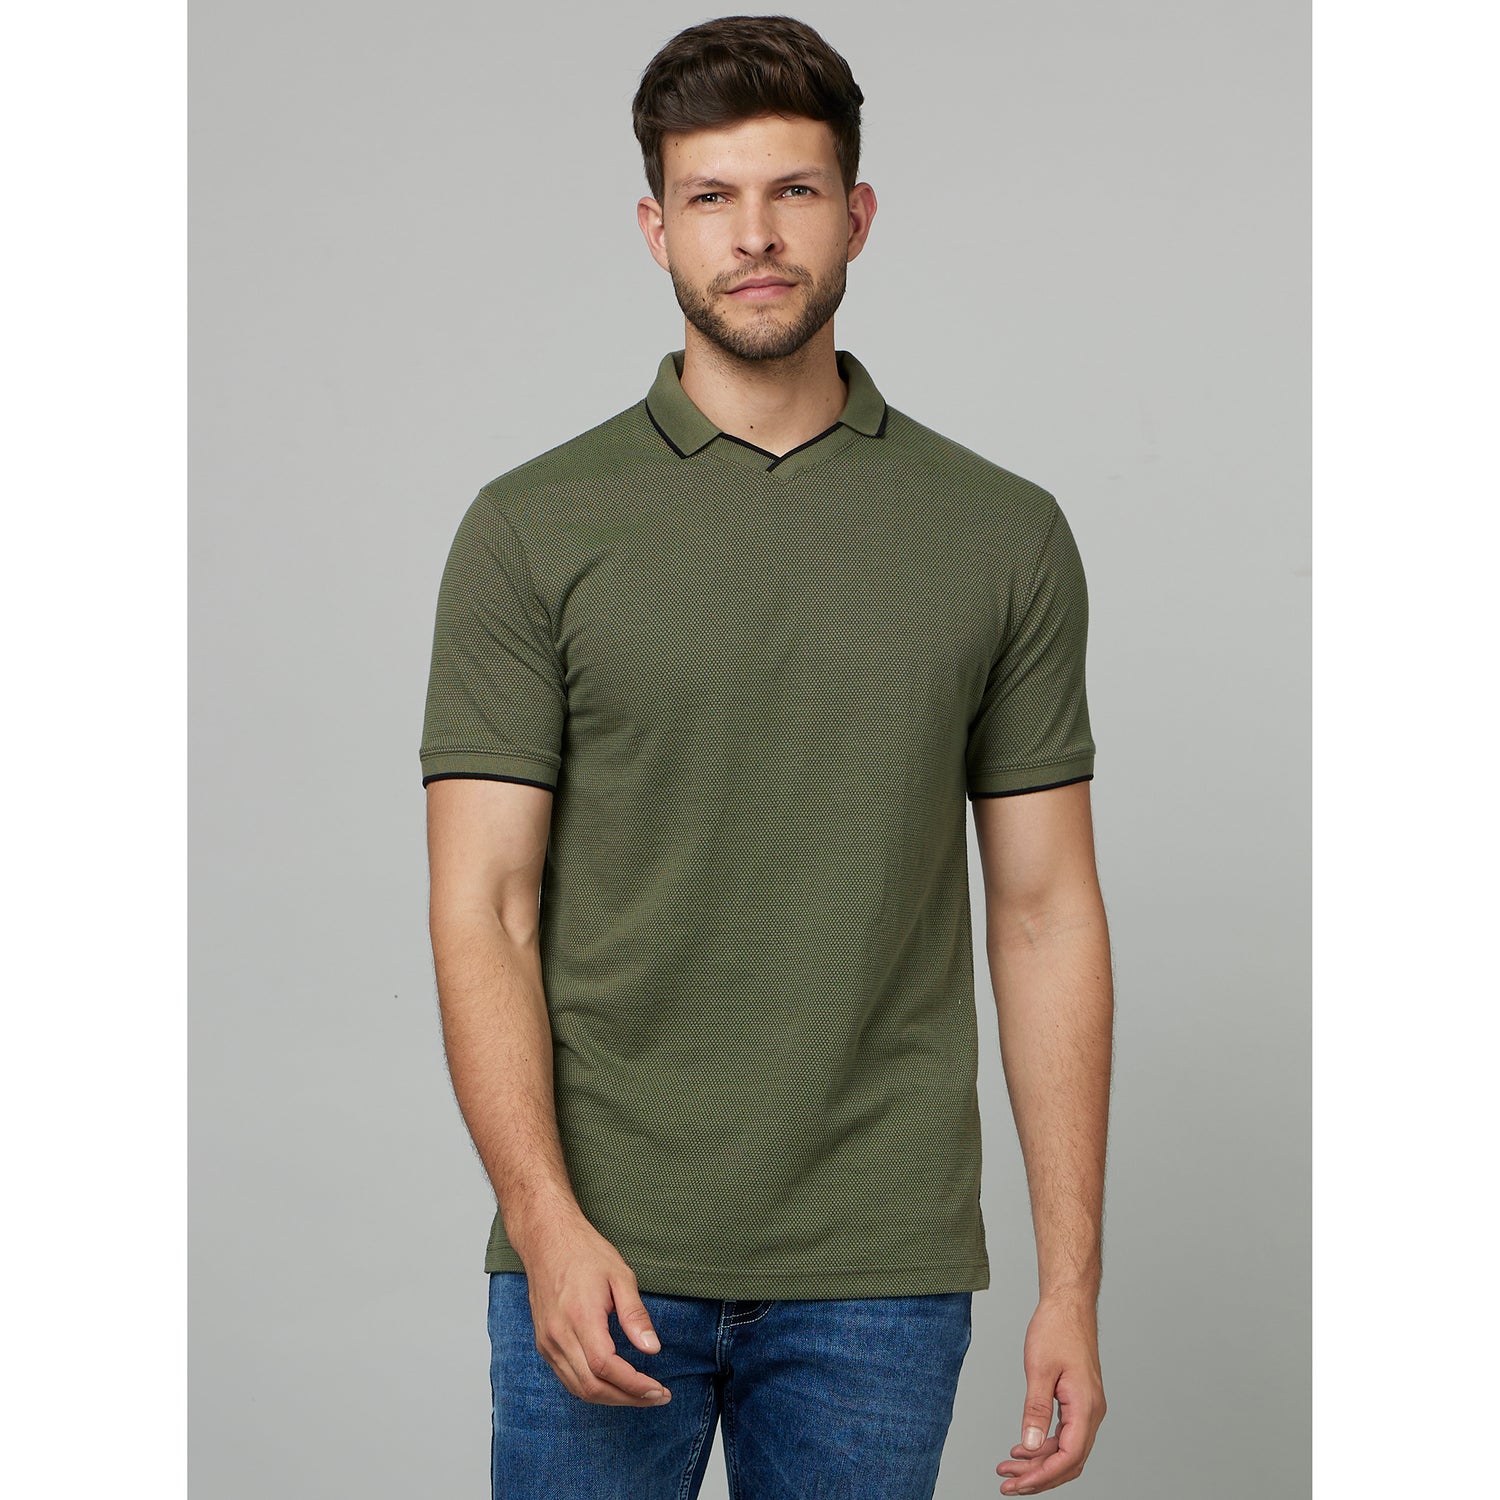 Olive Green Polo Collar Short Sleeves Cotton T-shirt (FETEXT)